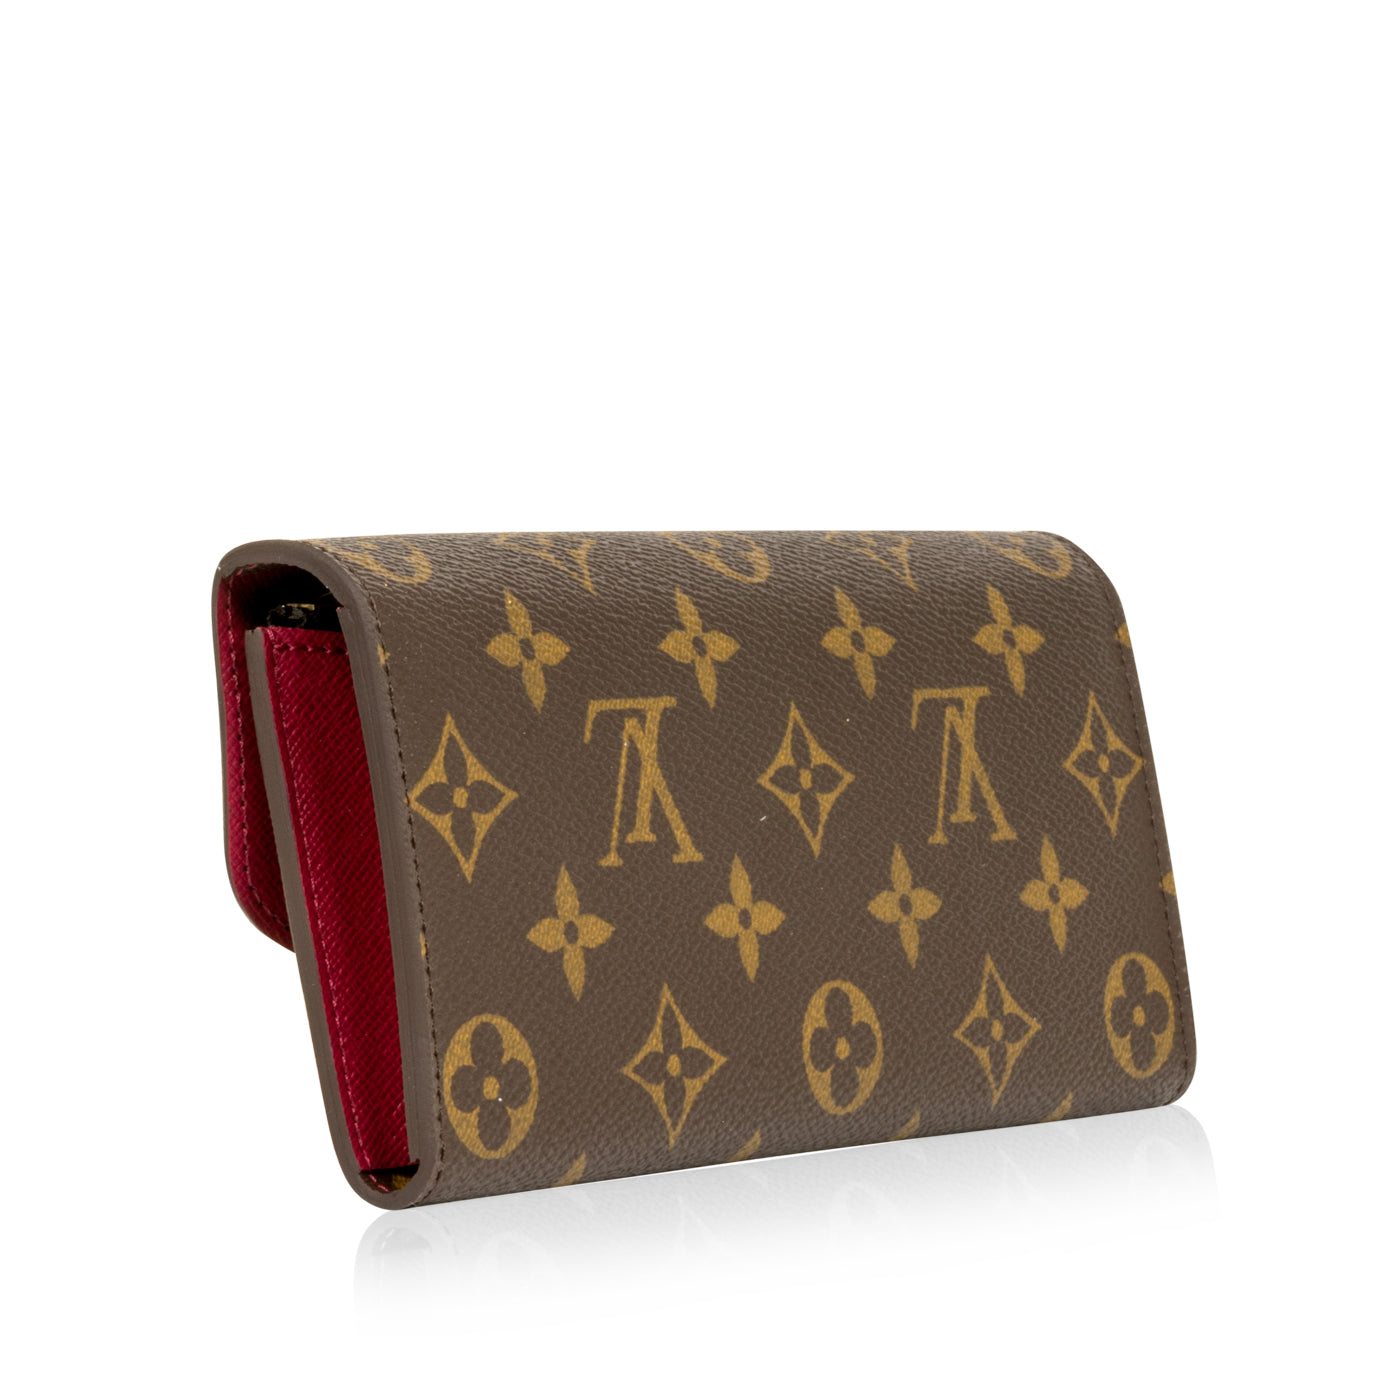 Affordable lv wallet emily For Sale, Bags & Wallets